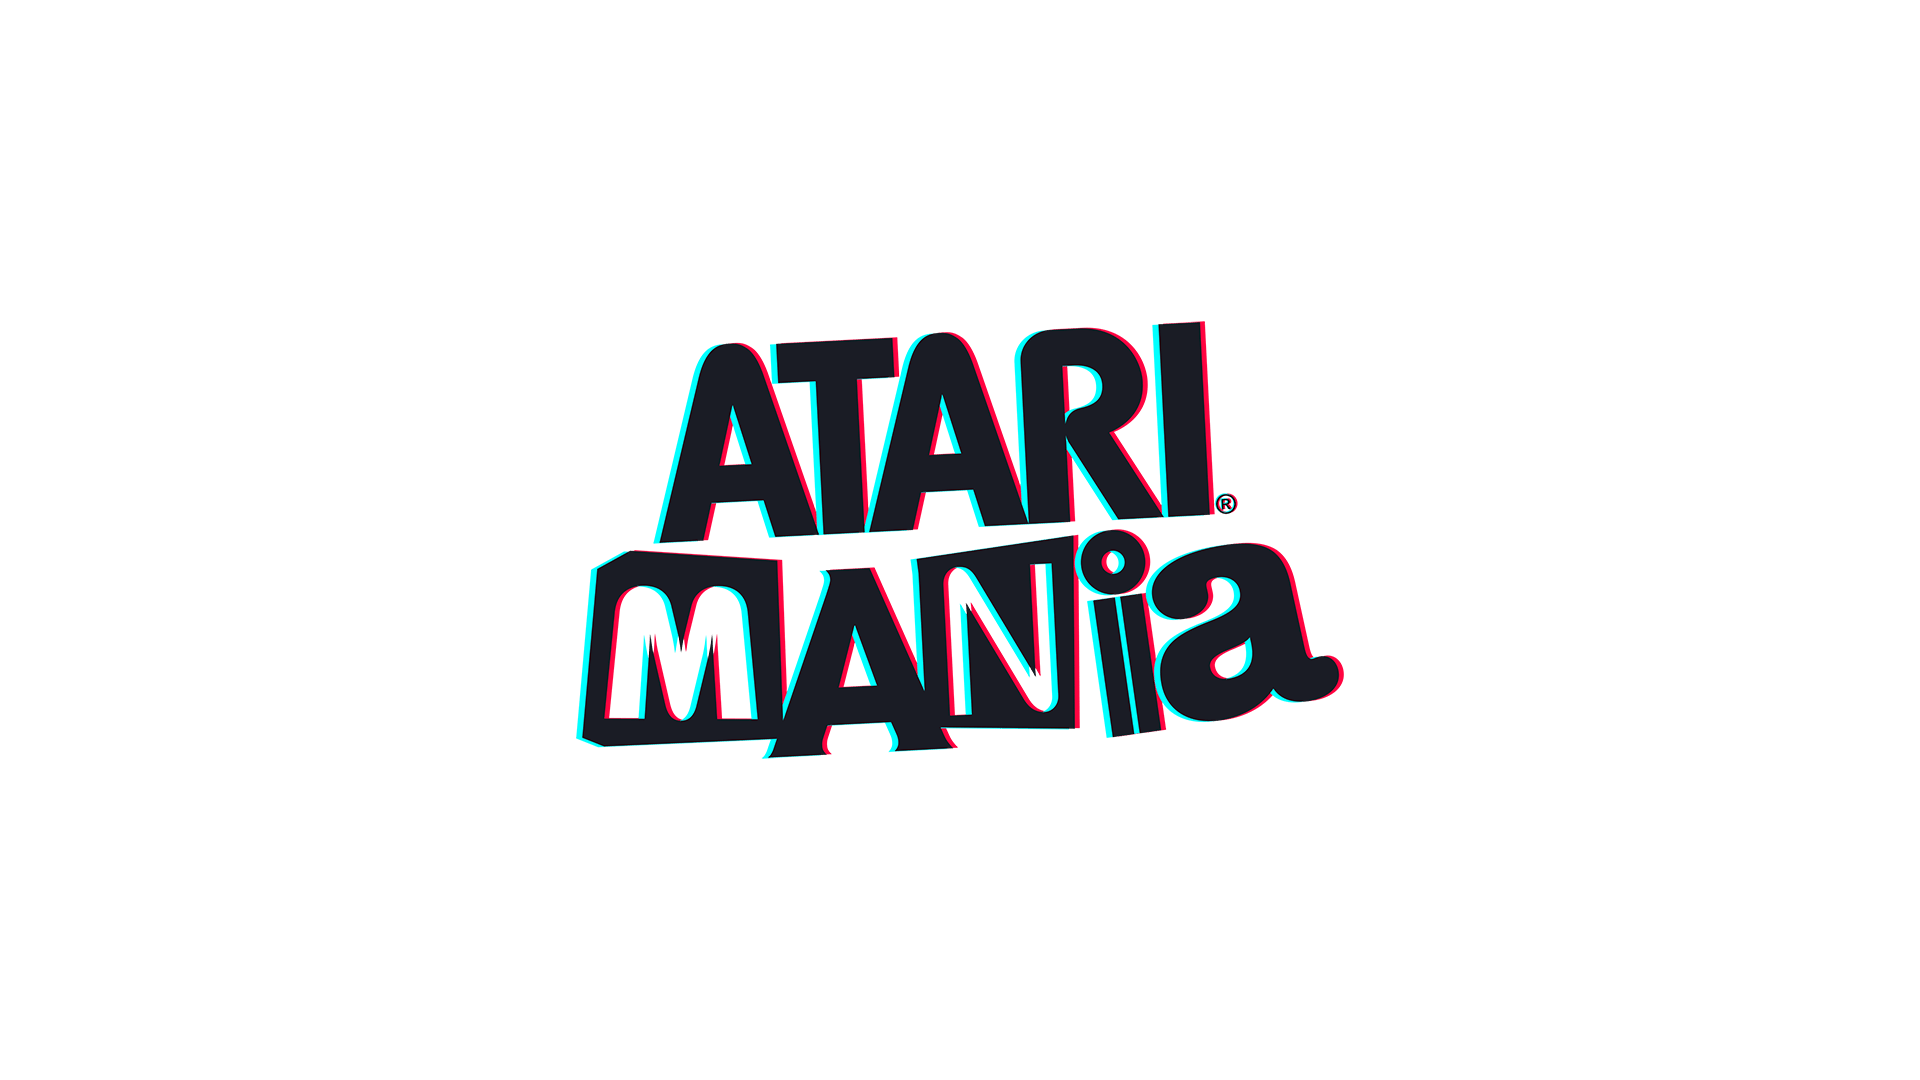 microgames collection Atari Mania announced for Switch, PC, and Atari VCS